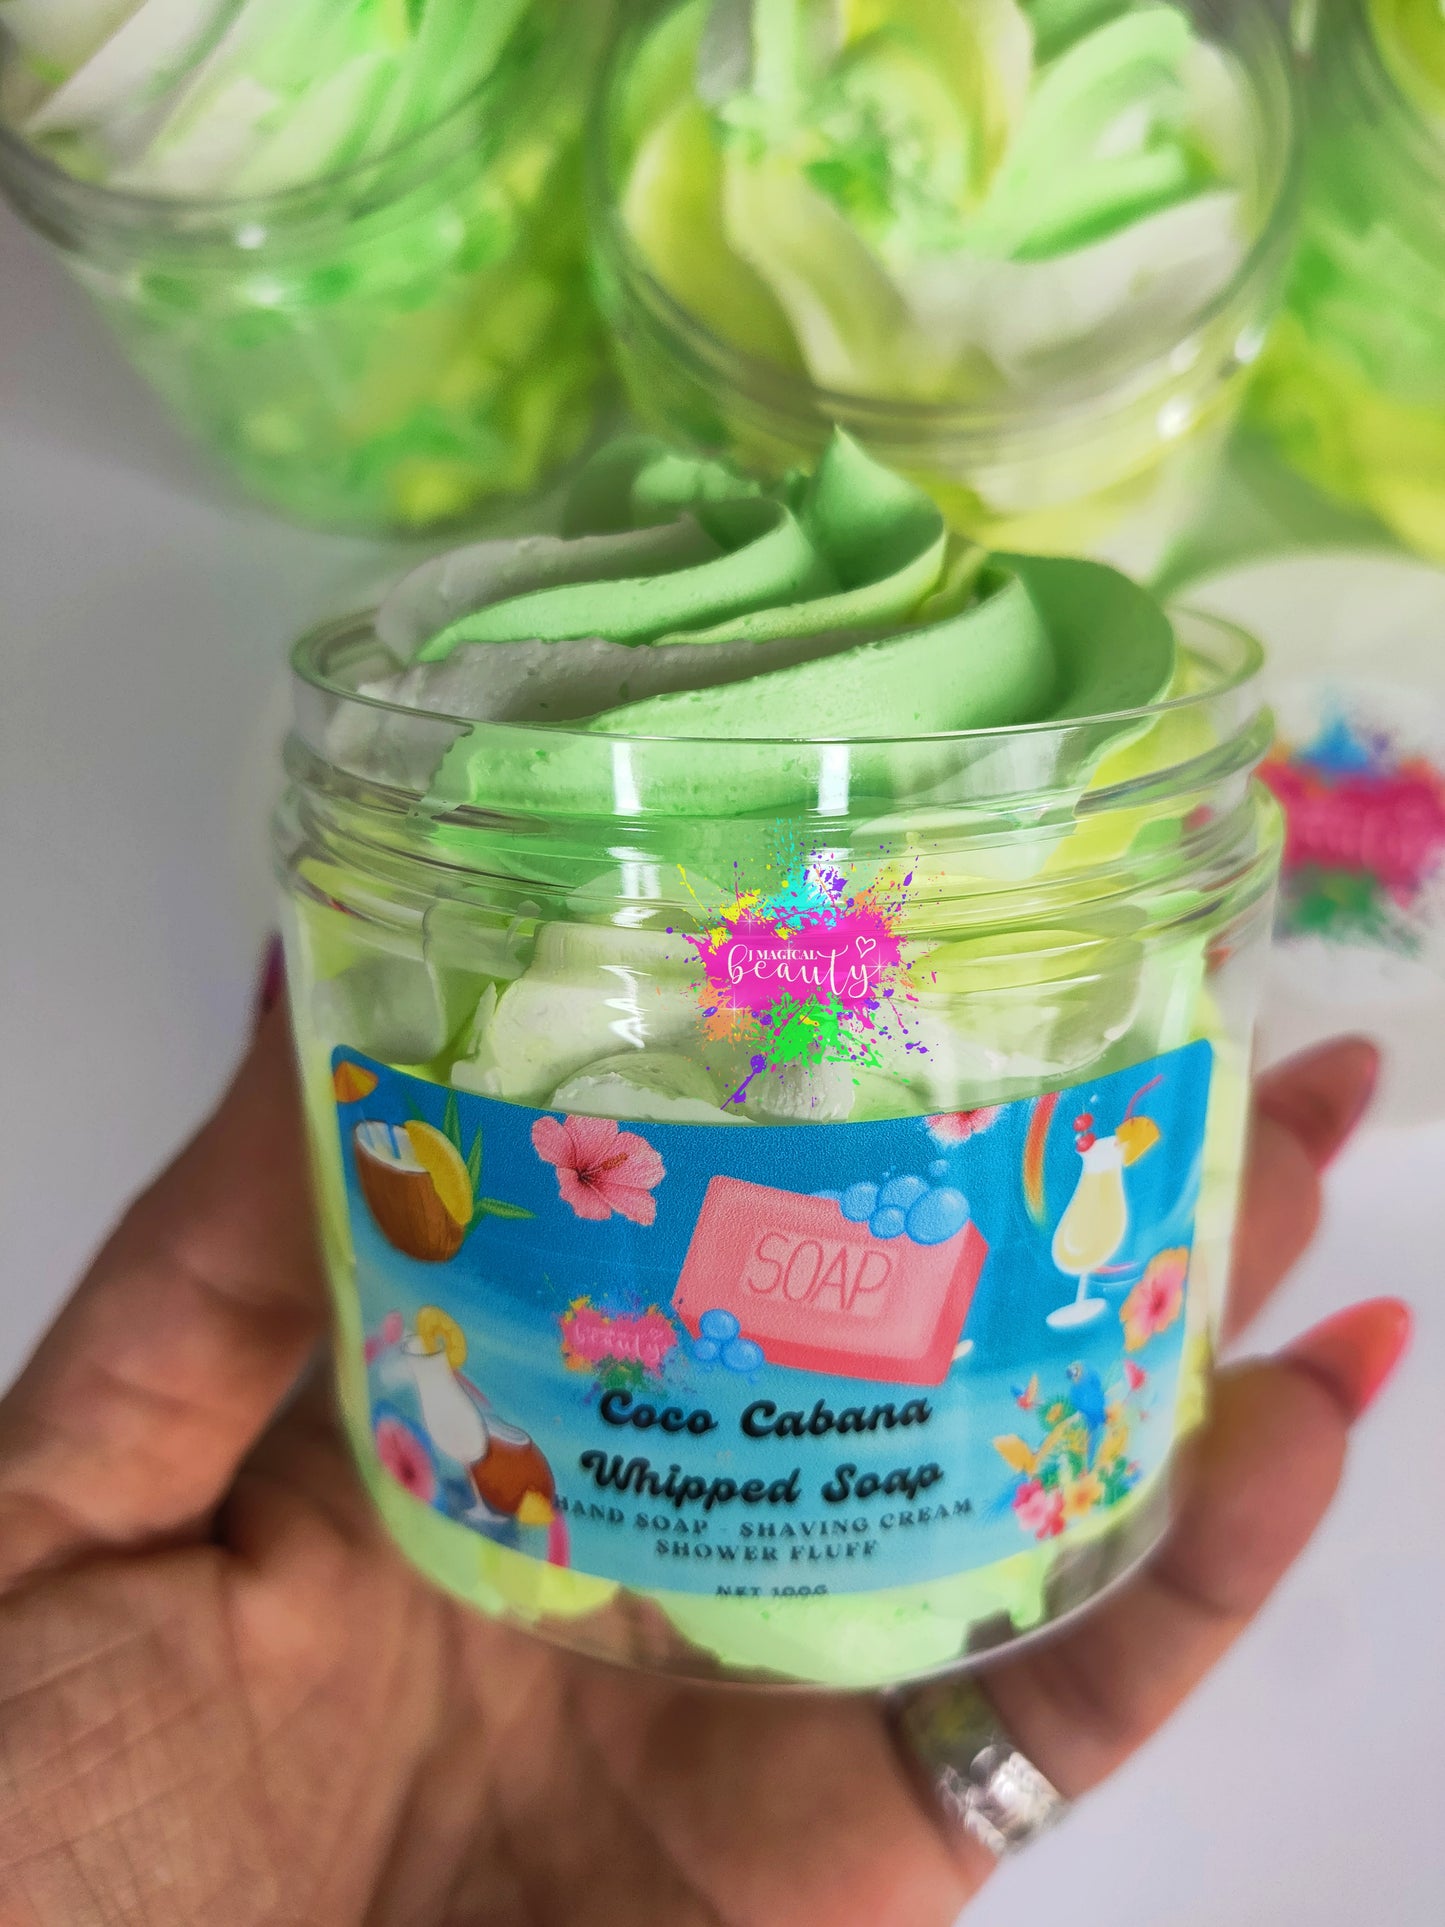 Coco Cabana scent Whipped Soap